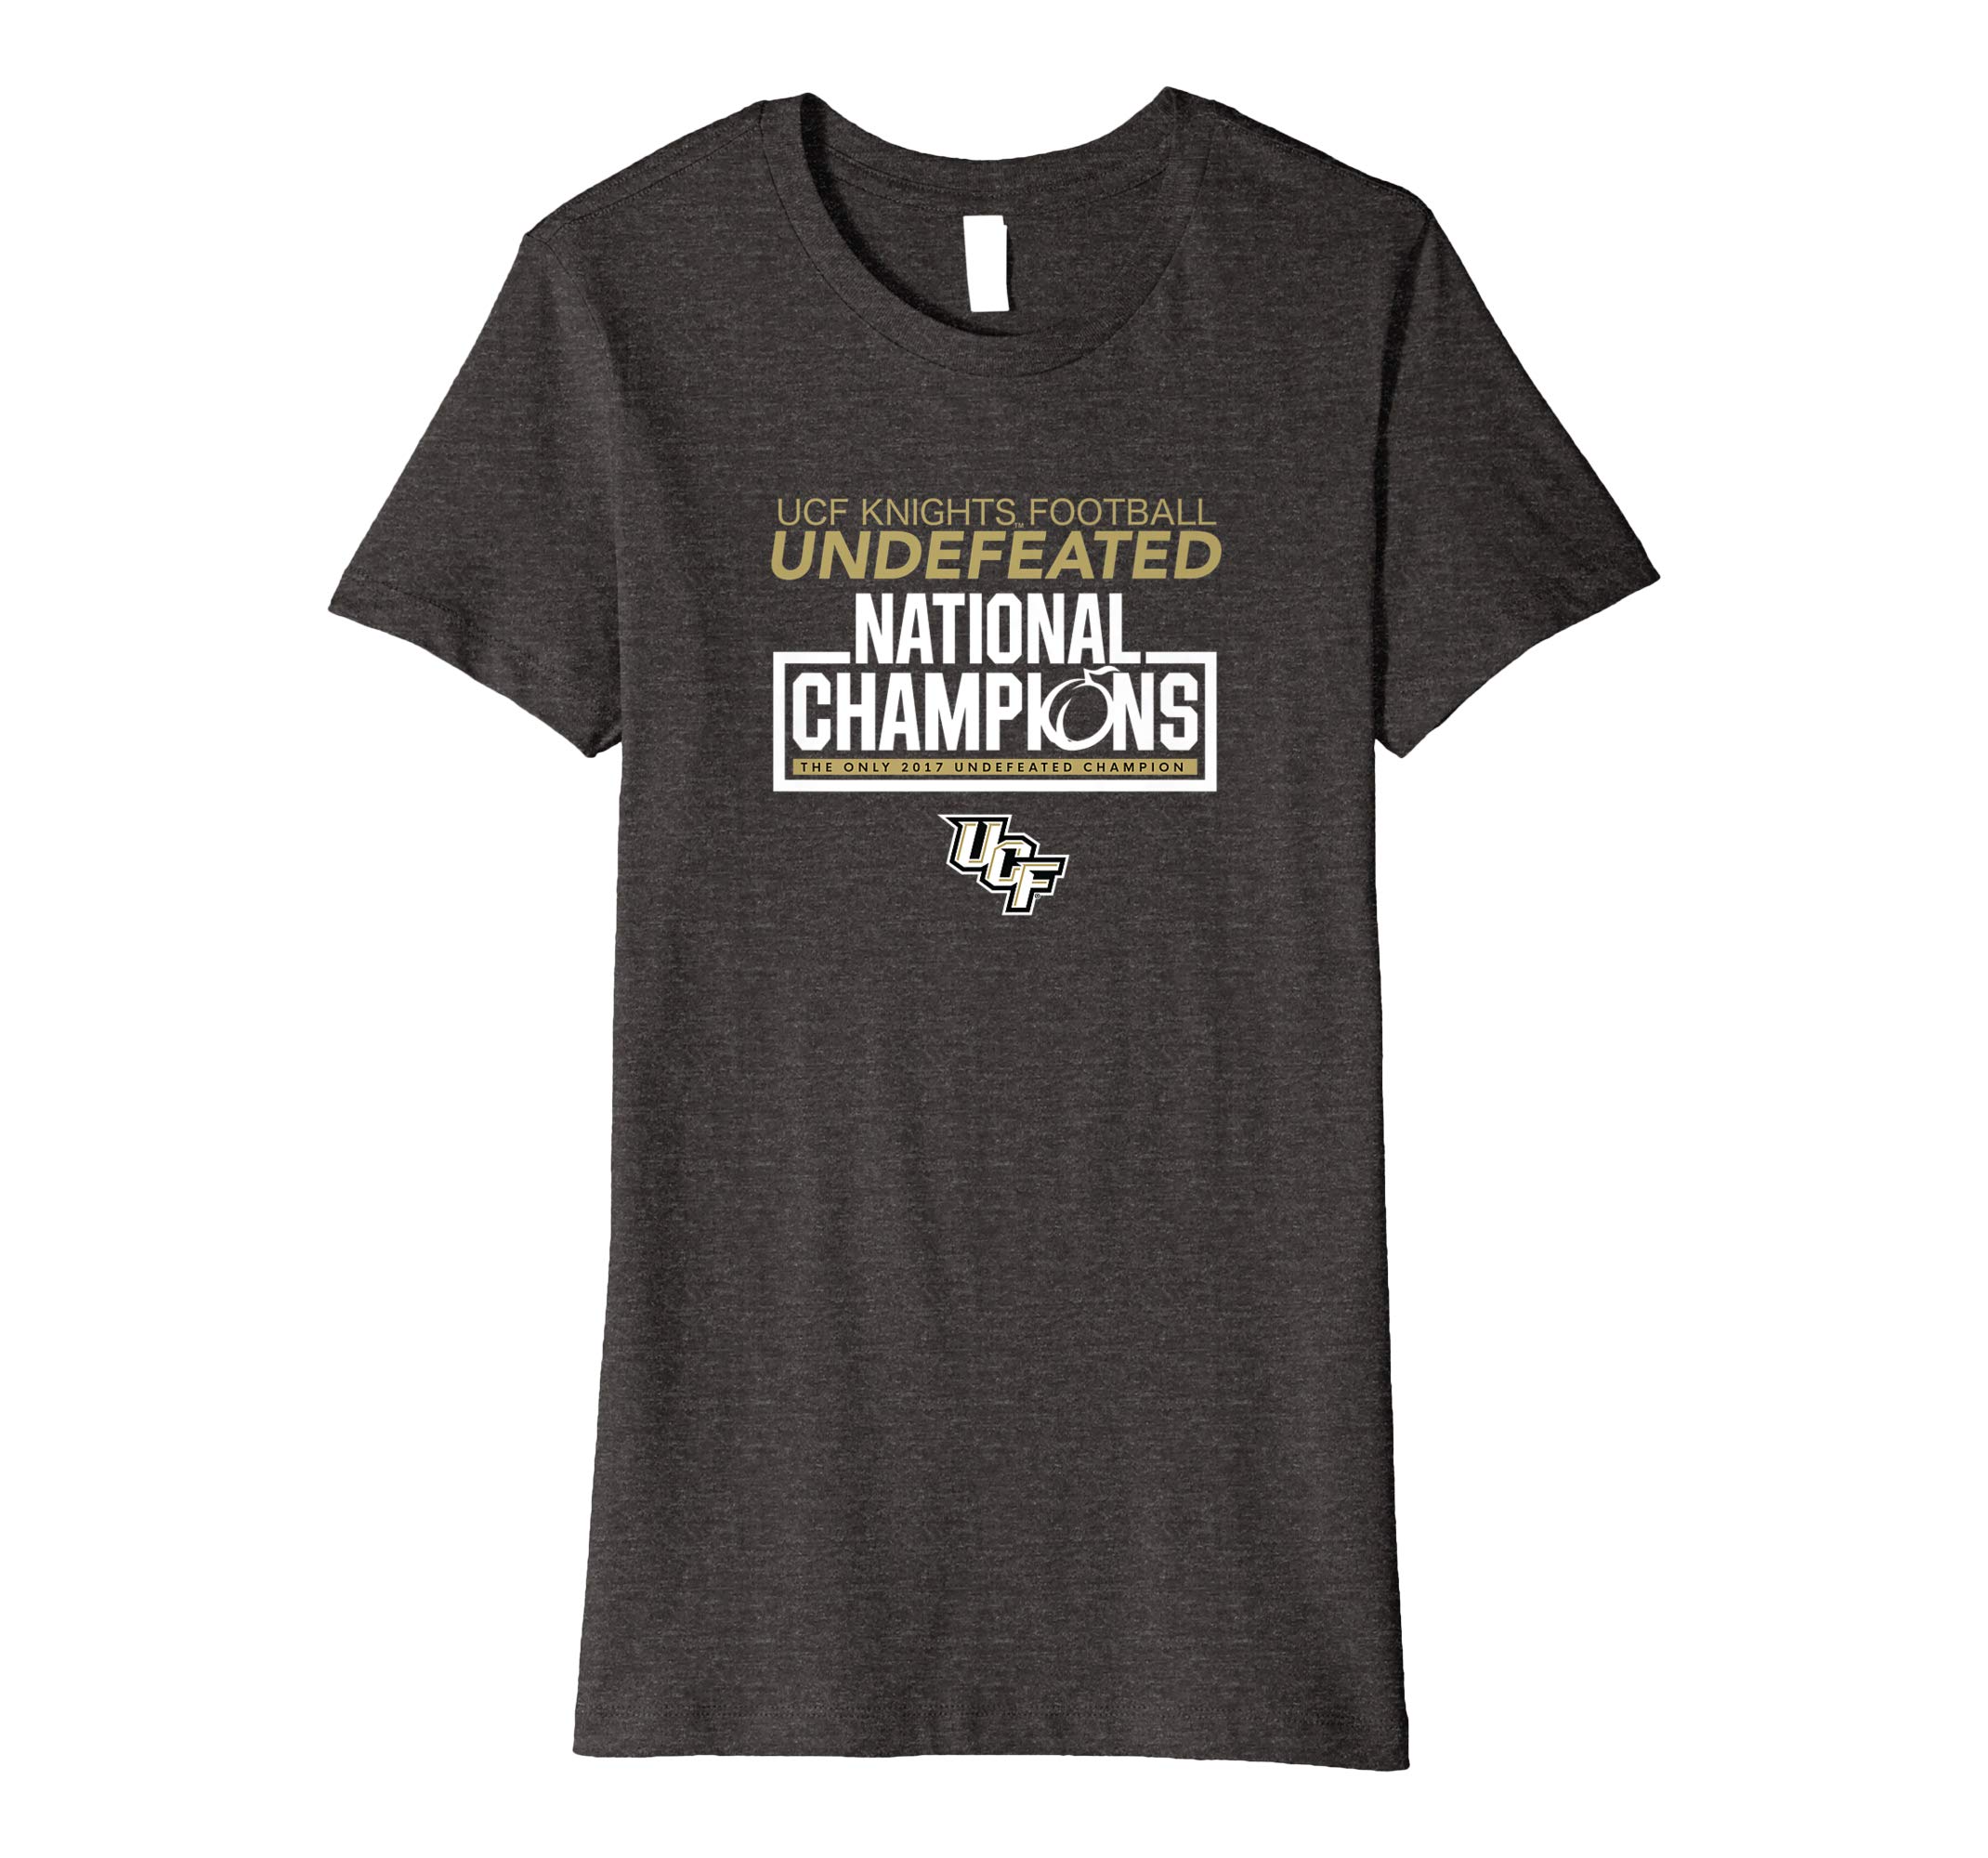 Undefeated Clothing Logo - UCF Knights Undefeated National Champions T Shirt